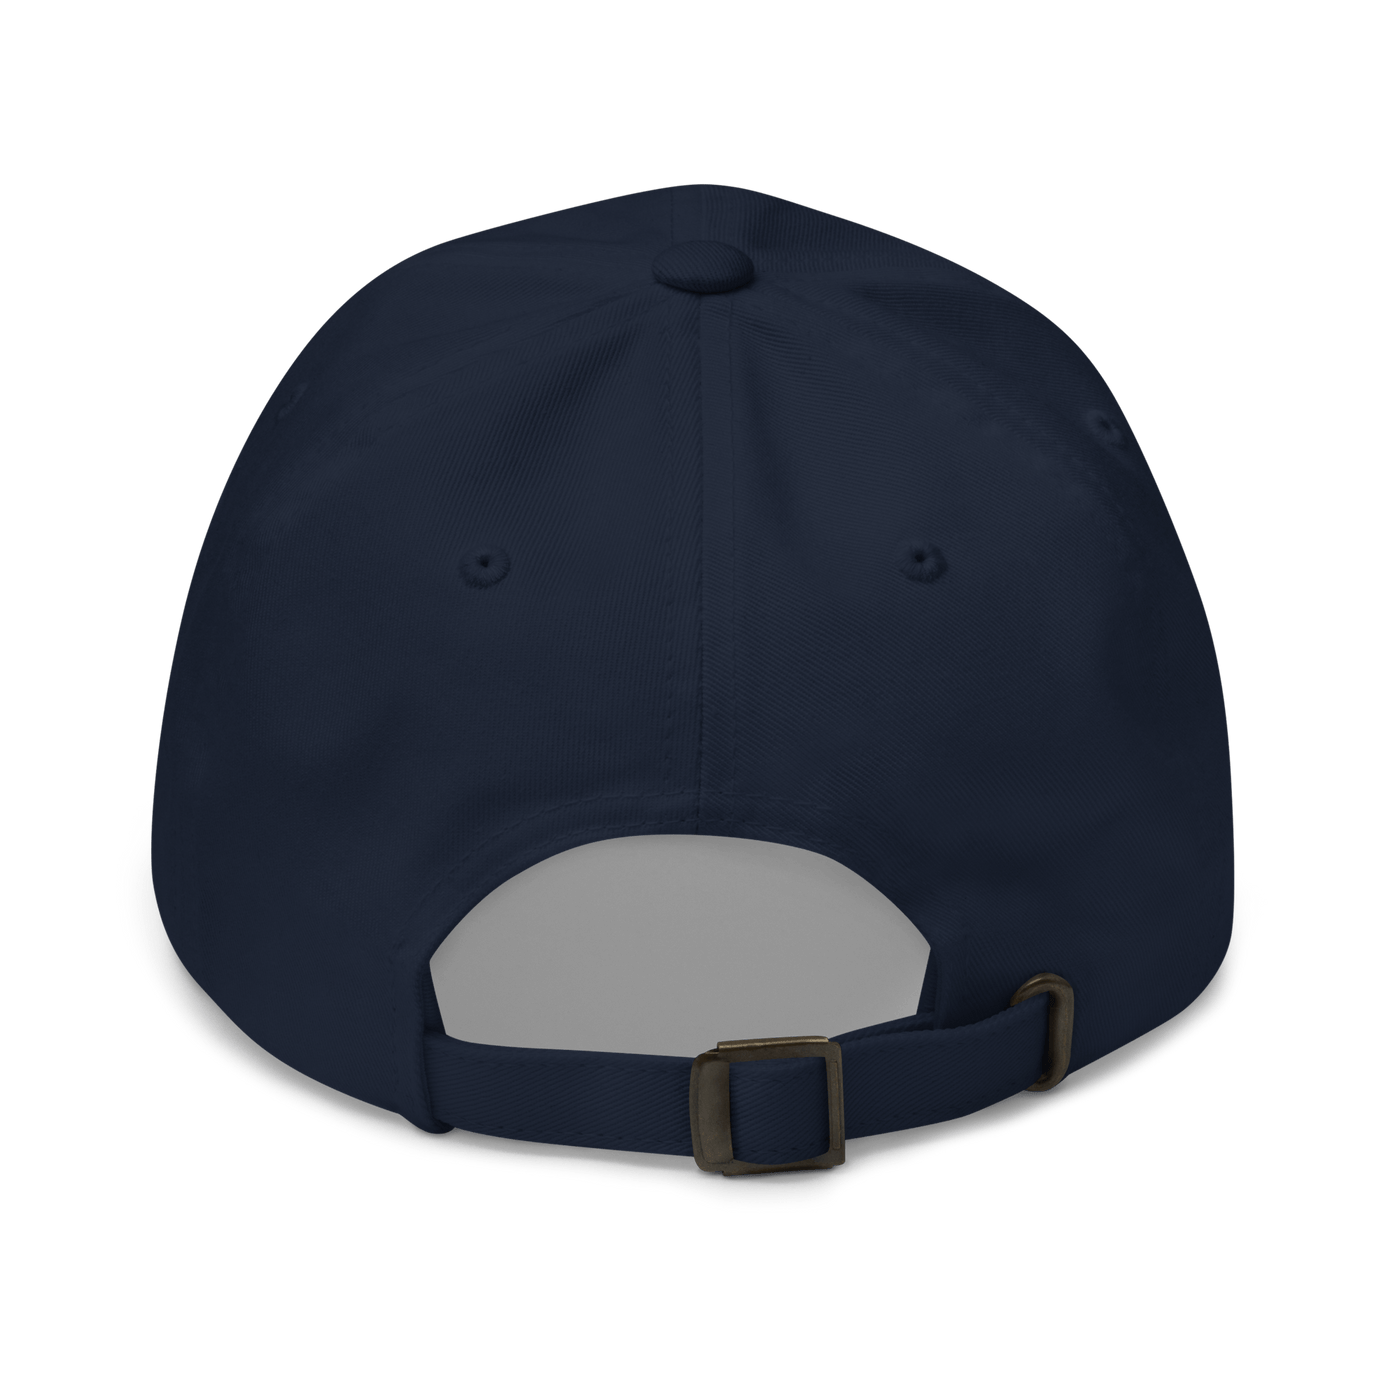 Fish & Chips Dad hat - Navy - - Just Another Cap Store